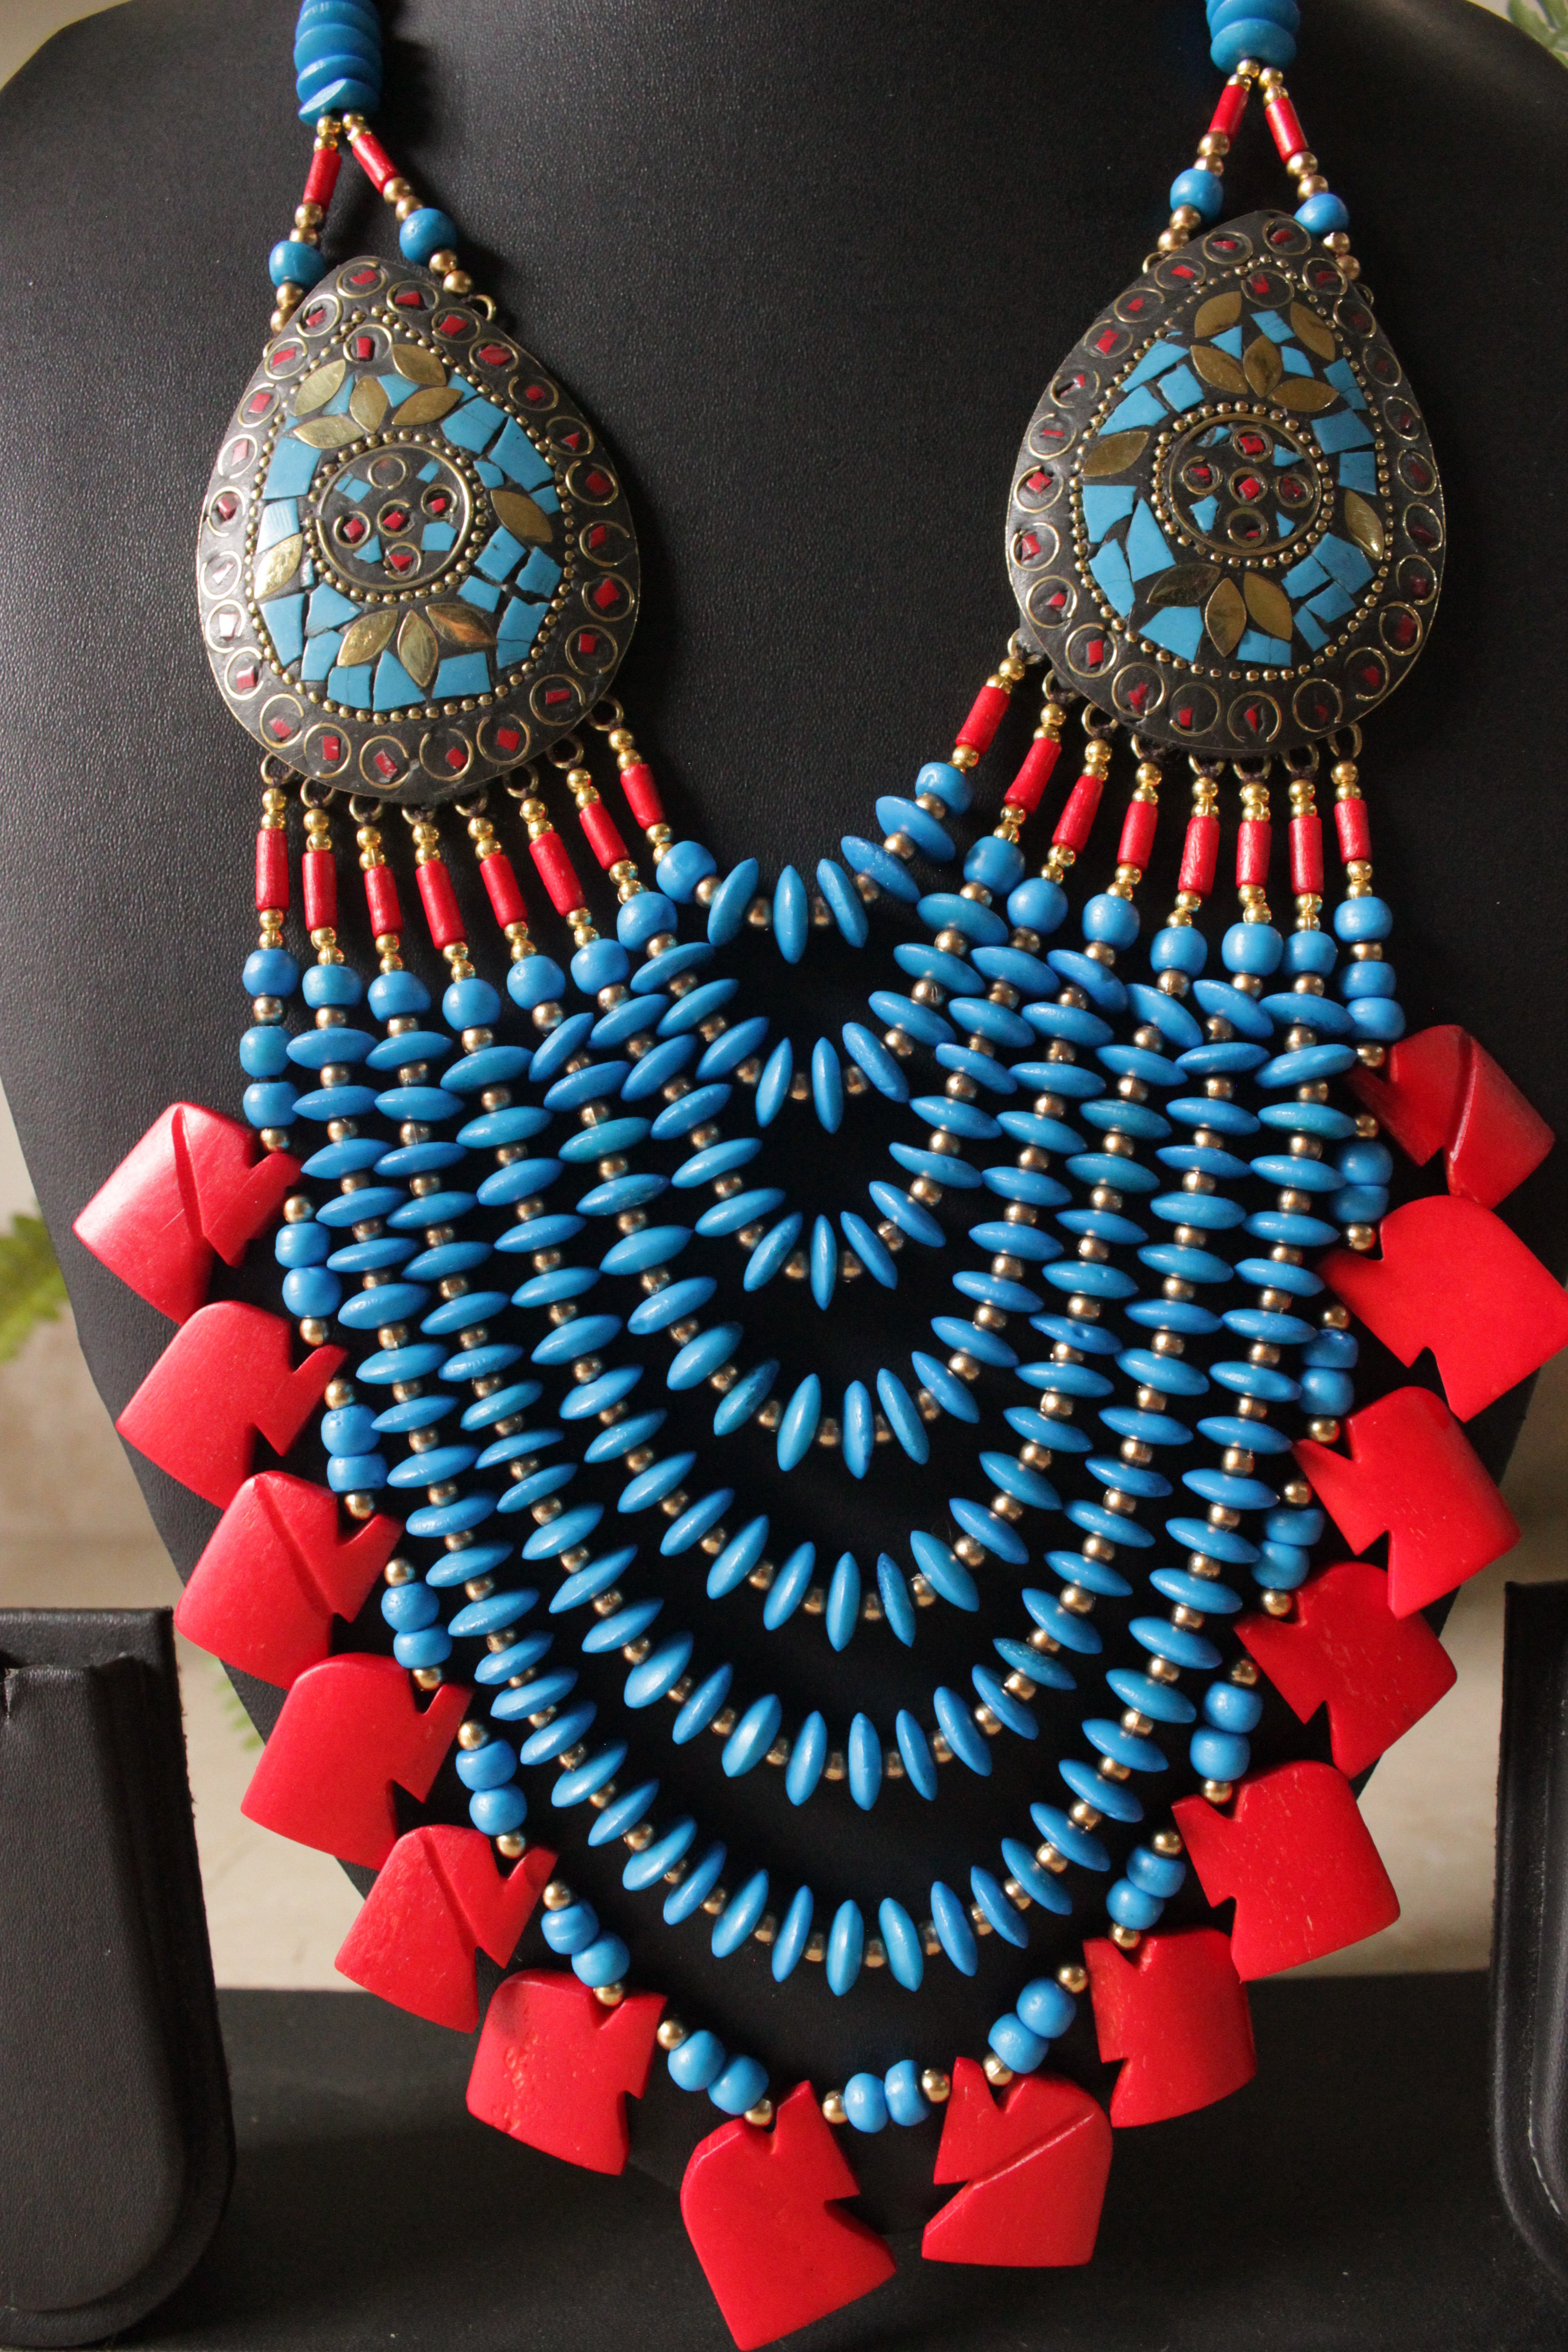 Sky Blue & Red Bone Beads Elephant Charms Tribal Motifs Handcrafted Statement African Tribal Necklace